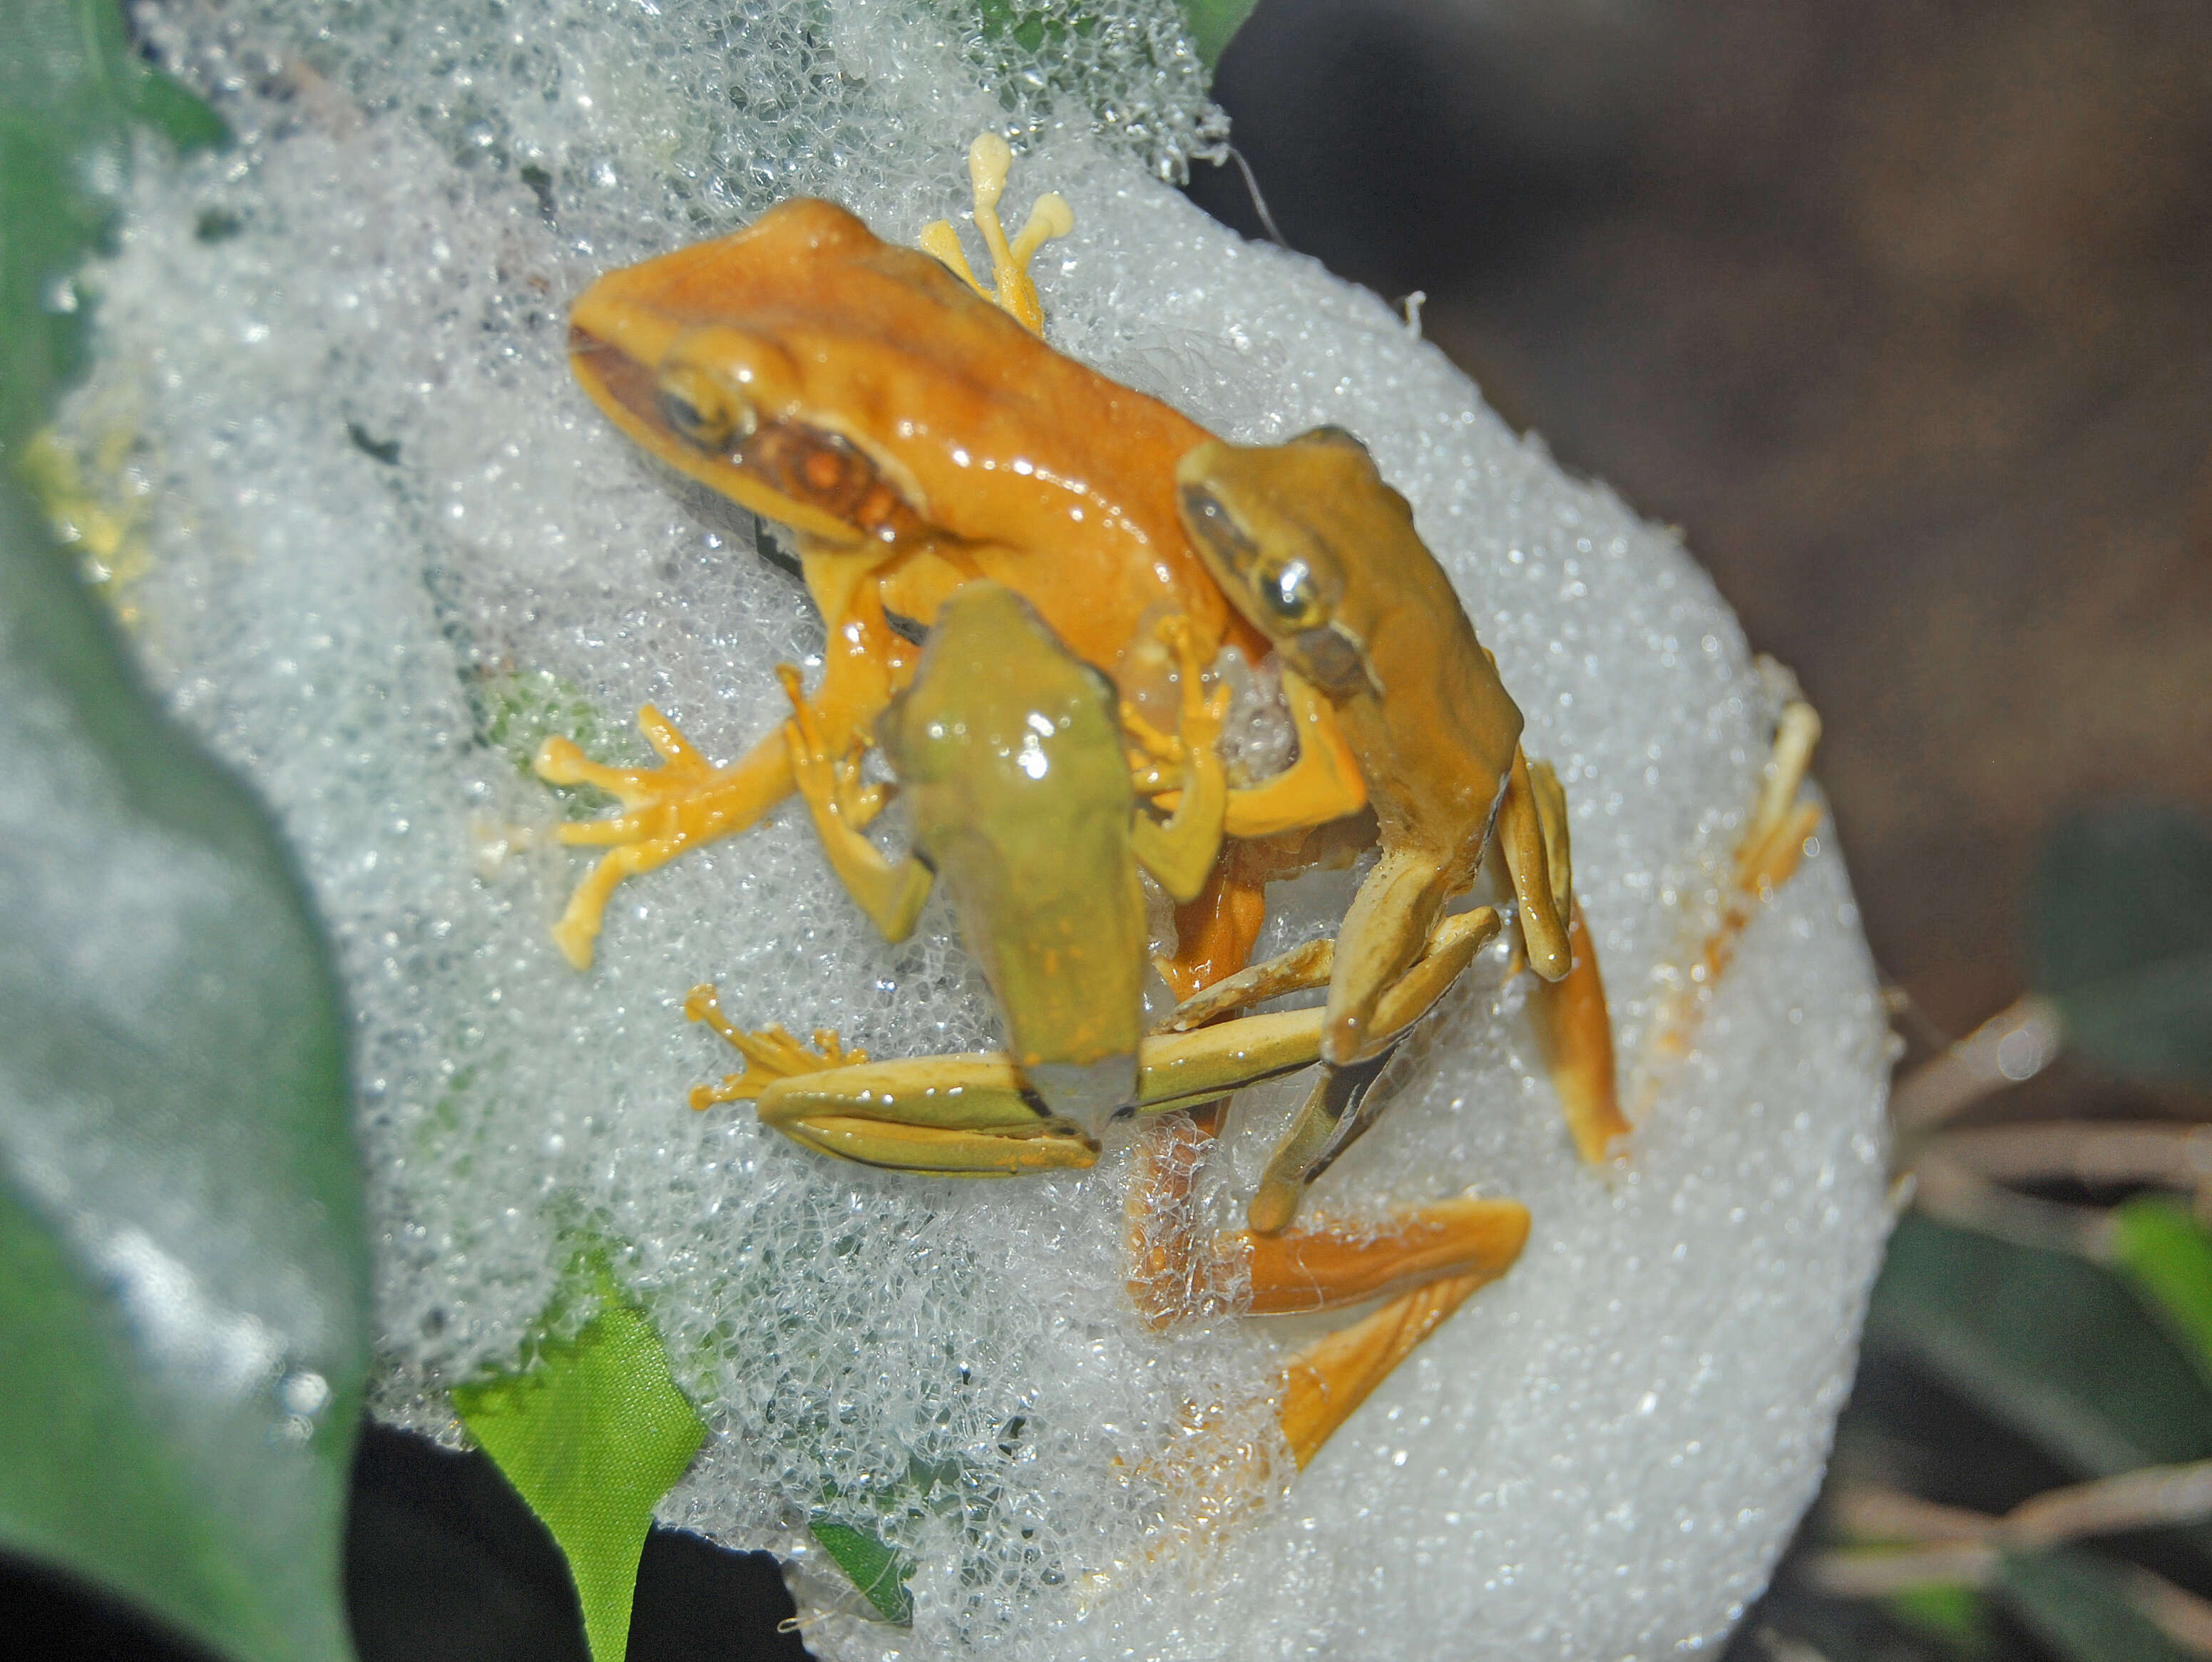 Image of Common Tree Frog